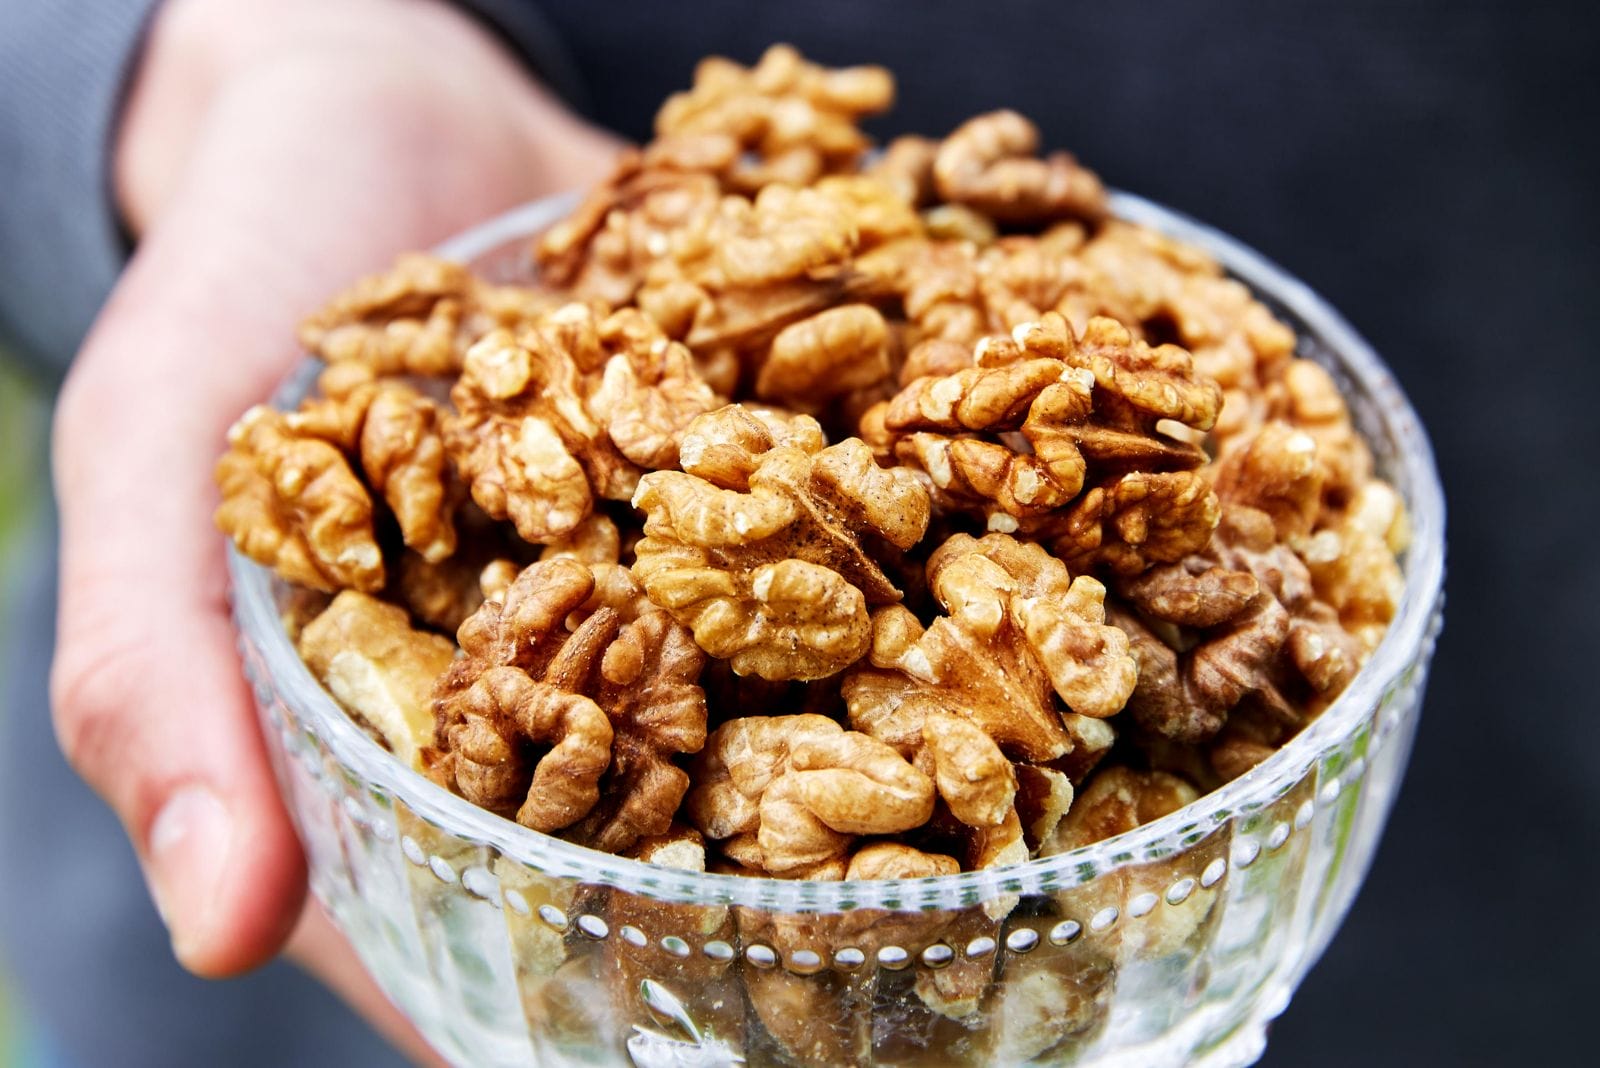 healthy snacking choices for consumers